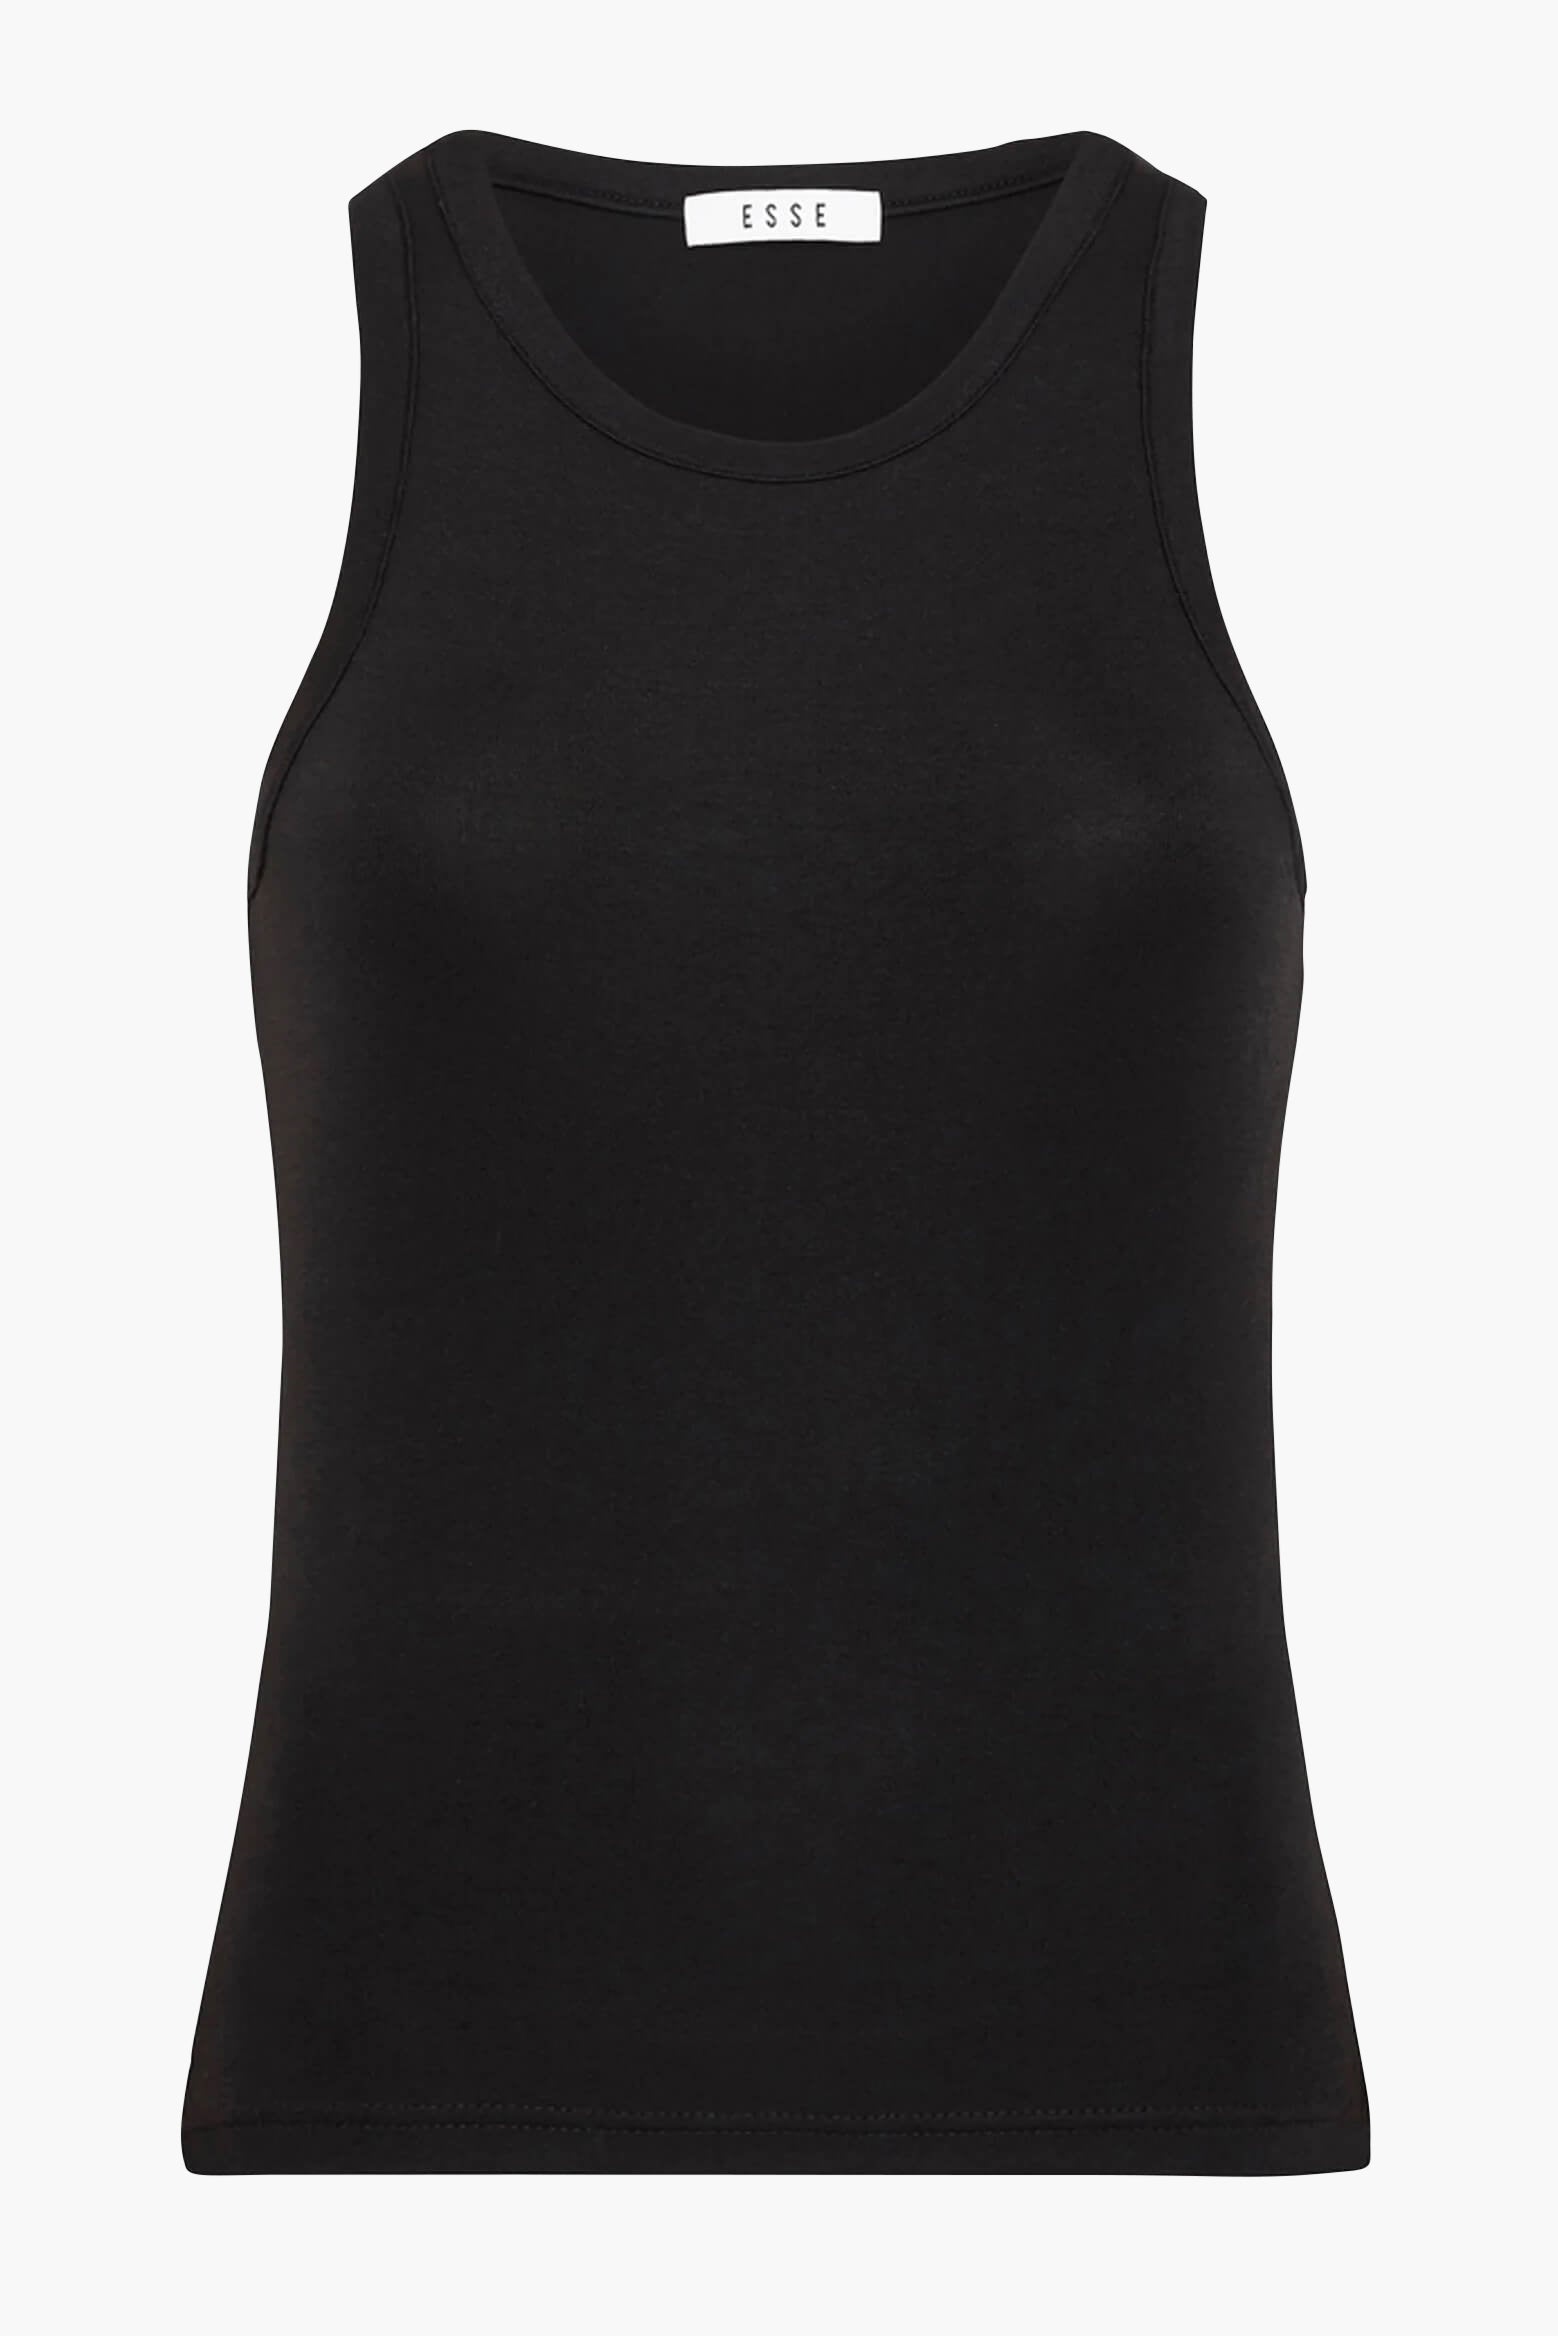 Esse Studios High Neck Tank Top in Black available at The New Trend